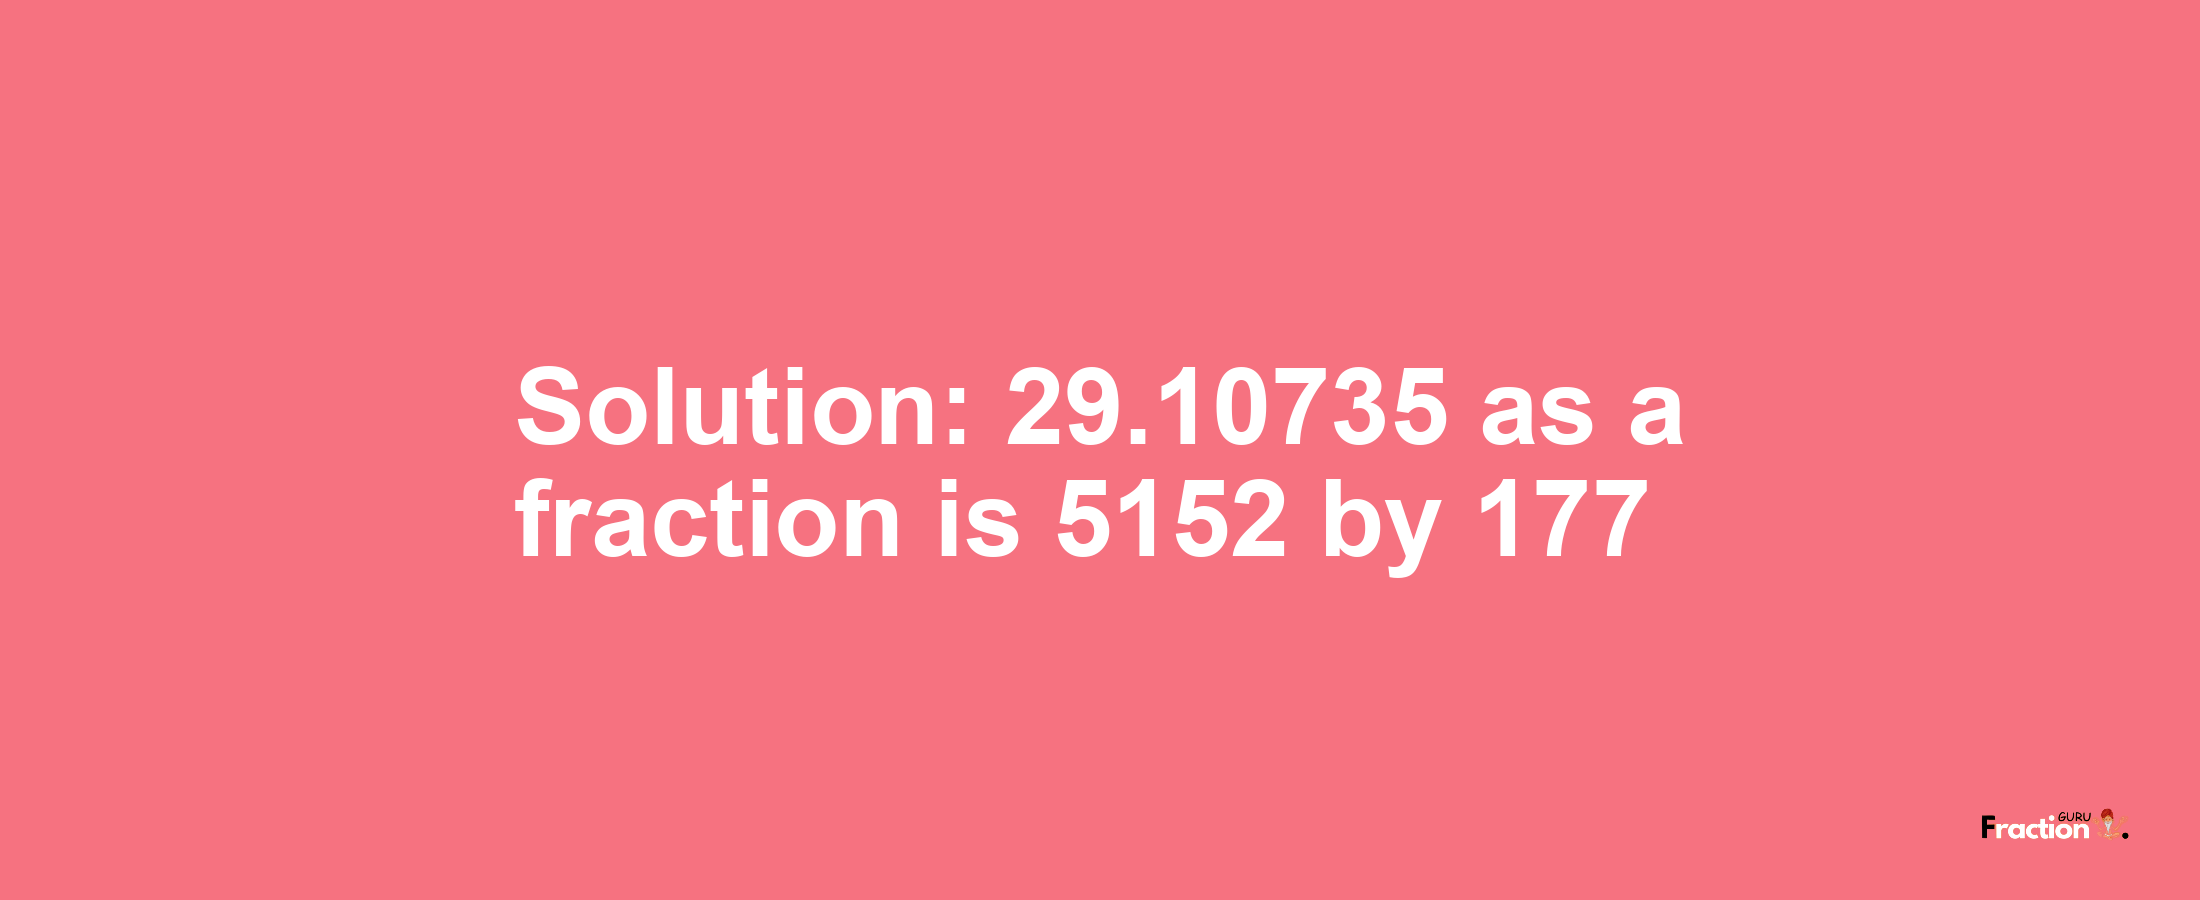 Solution:29.10735 as a fraction is 5152/177